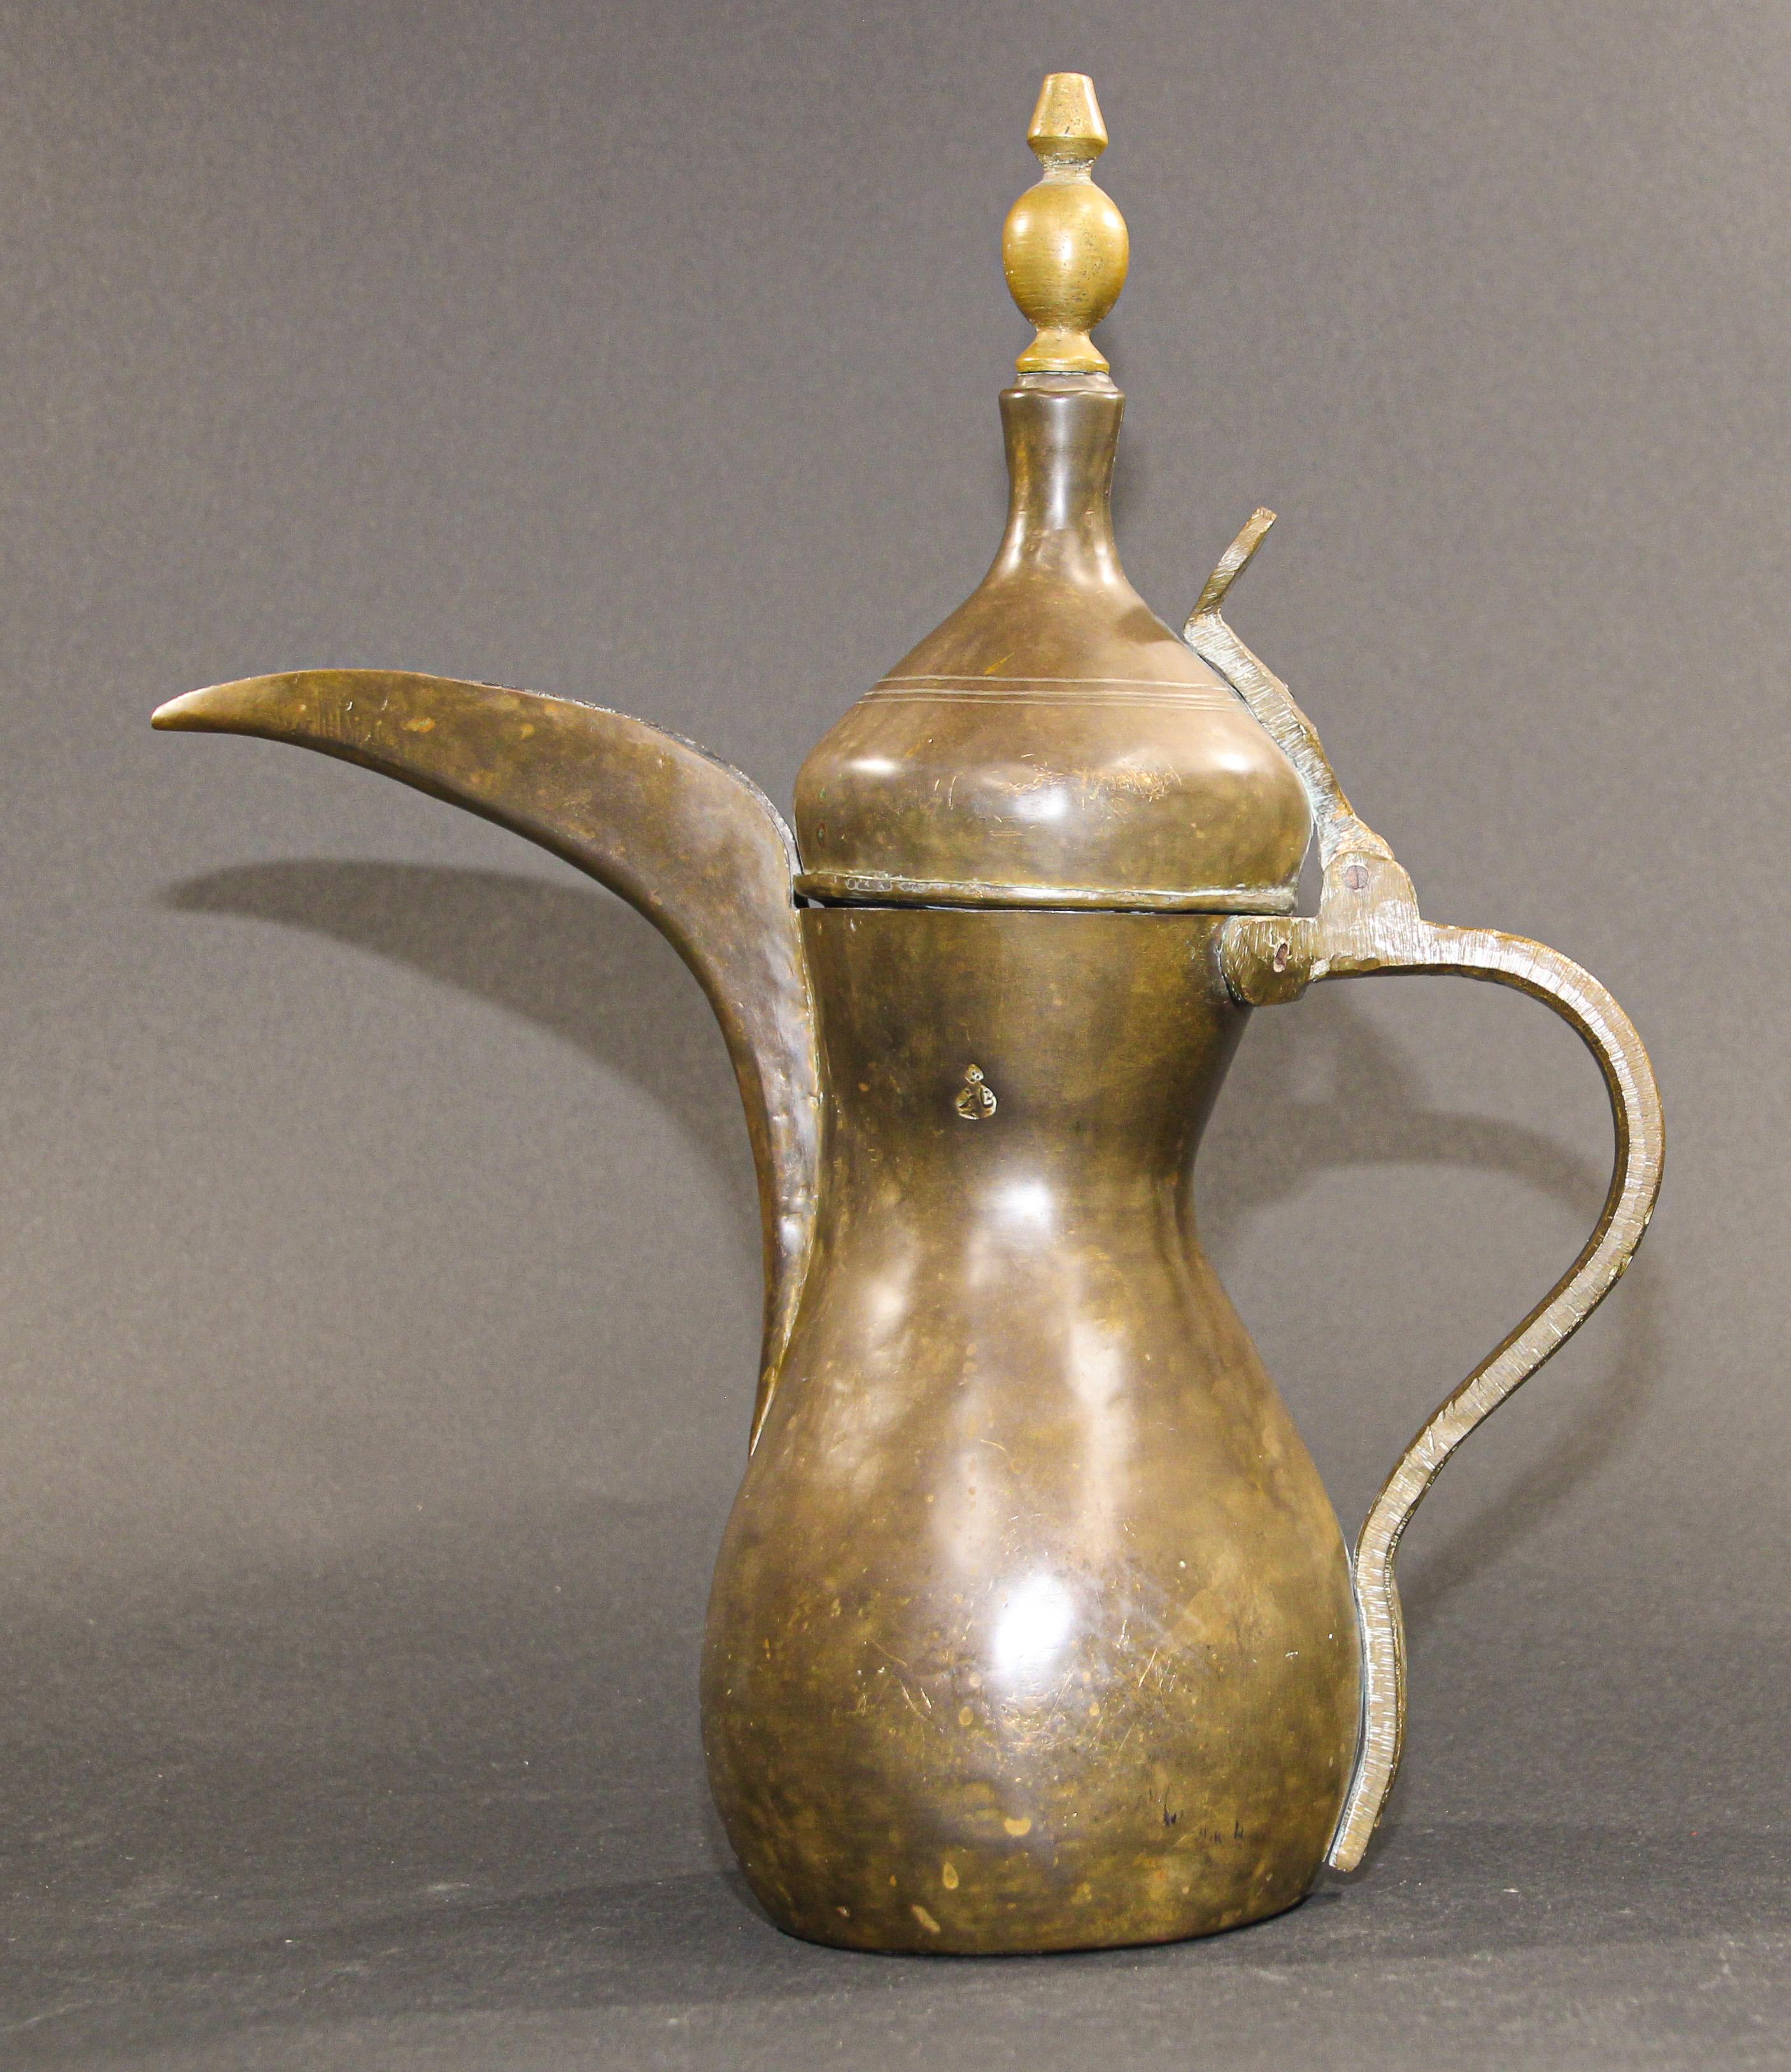 Middle Eastern traditional Arabian brass Dallah coffee pot. 
Coffee pot hand-hammered and chased copper with riveted brass finish and a very large spout. 
Size: 15